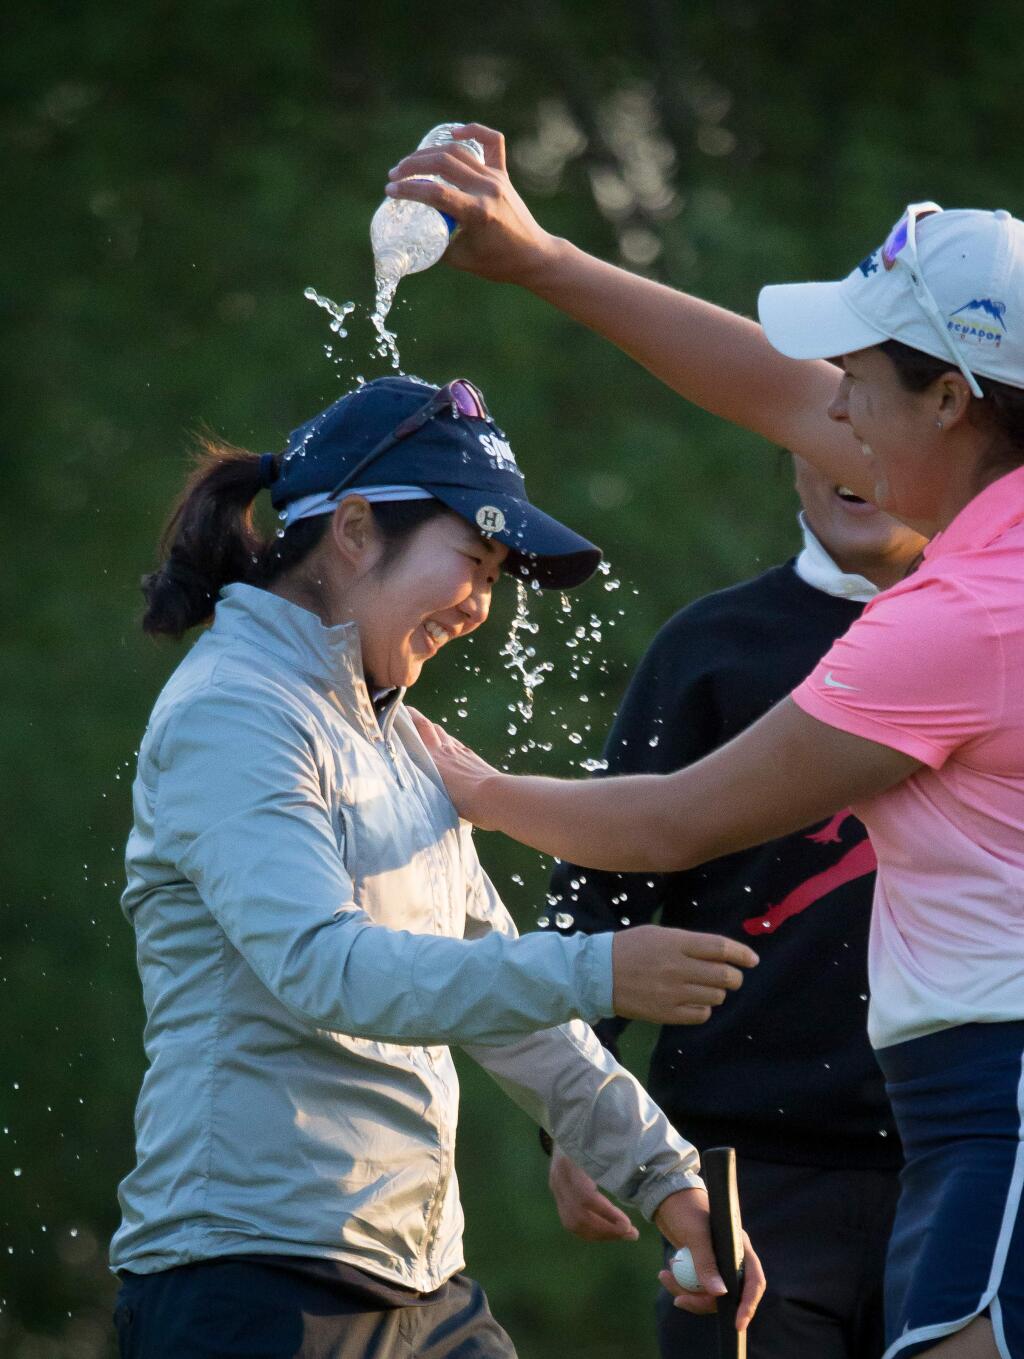 Hyemin Kim is drenched with water by Daniela Darquea after winning the final round of the LPGA's Symetra Tour stop at the Windsor Golf Club Sunday, April 9, 2017. Kim finished first with 7 under par.